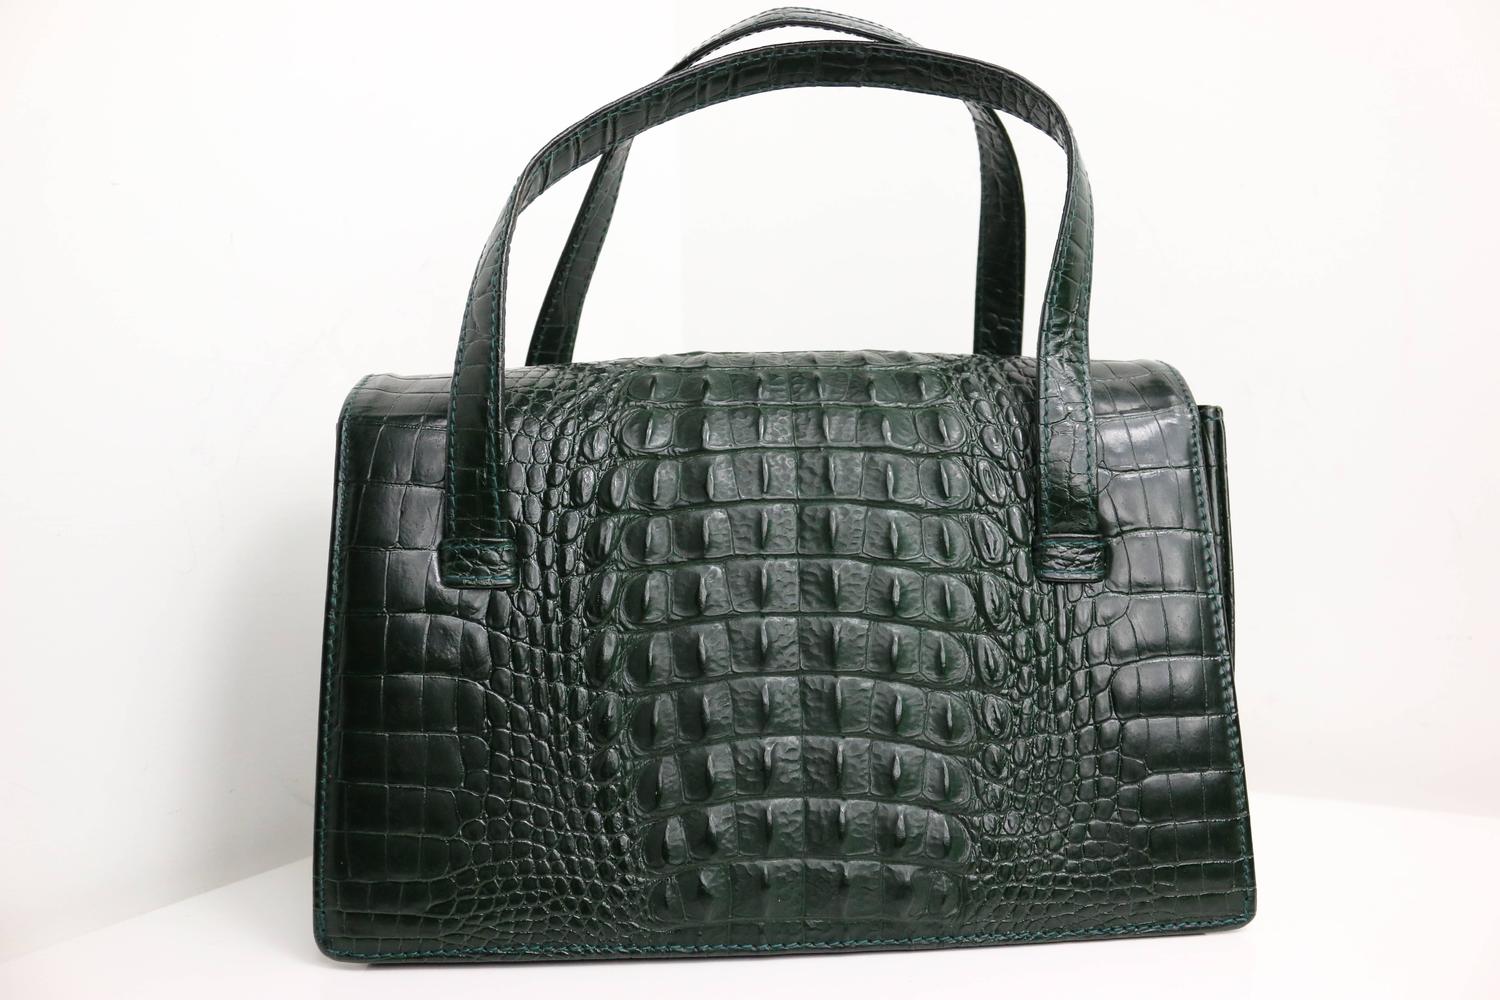 Georges Rech Dark Green Croc Embossed Leather Kelly Style Handbag For Sale at 1stdibs